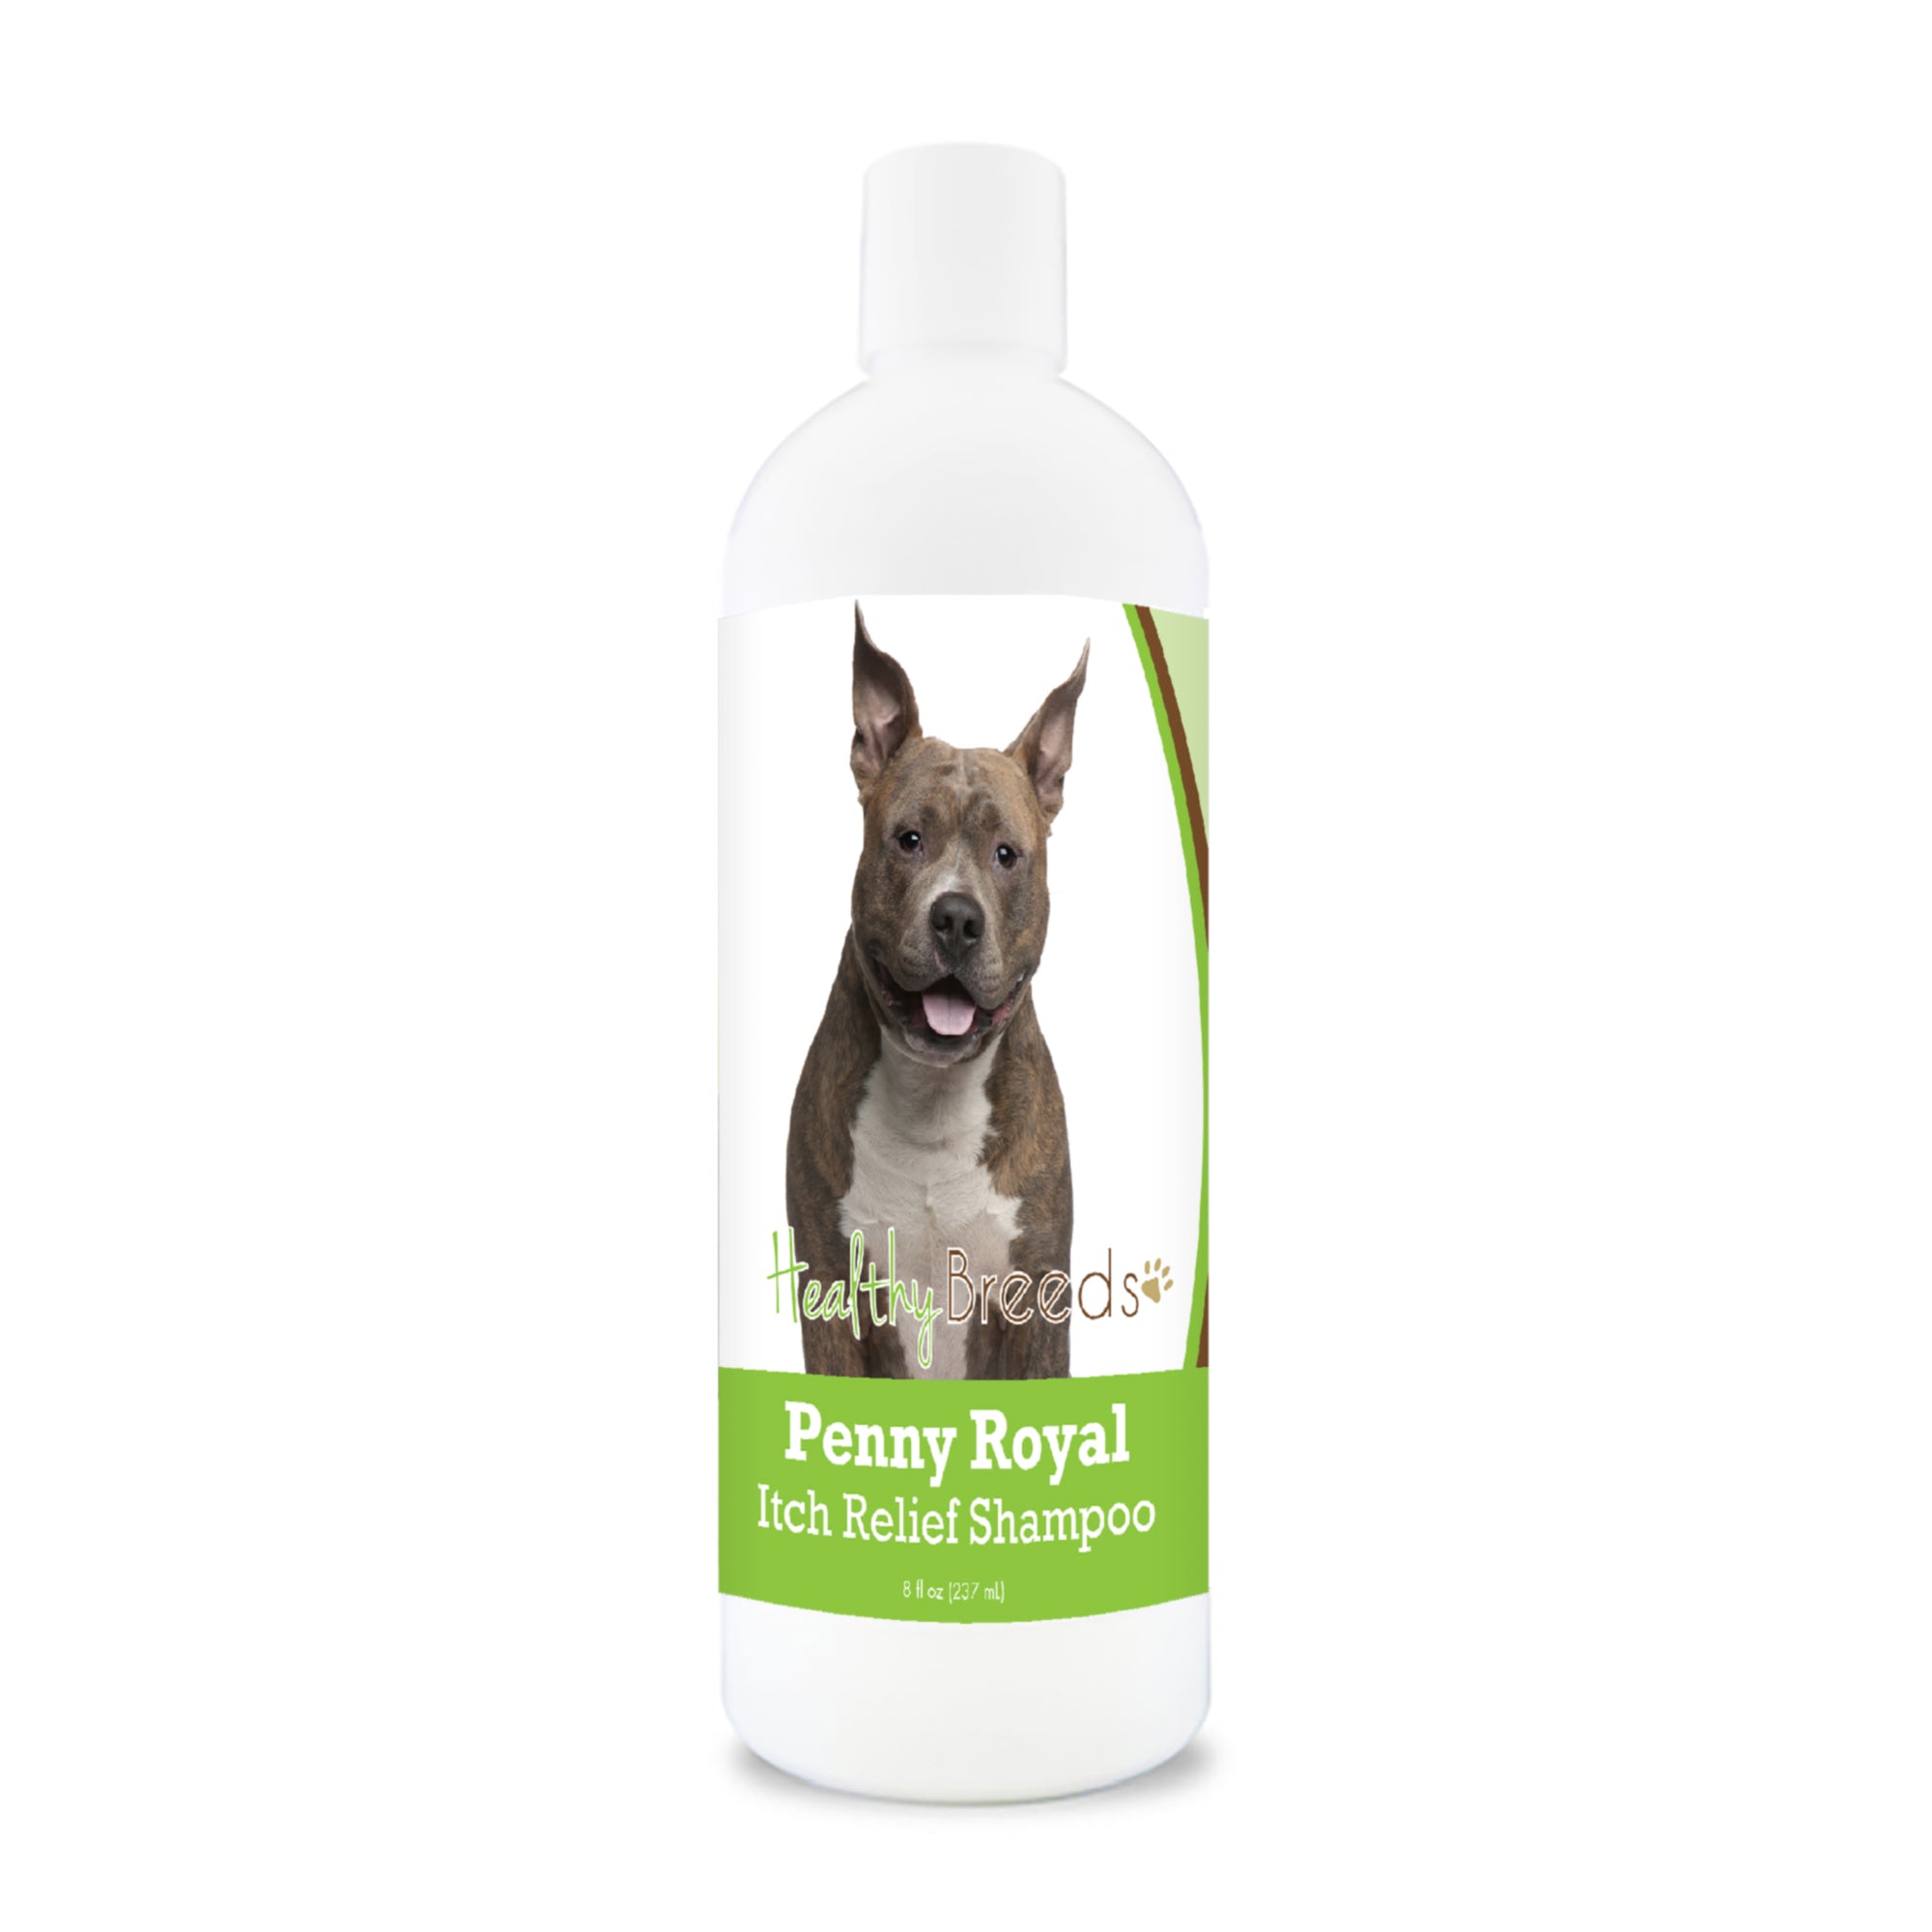 American Staffordshire Terrier Penny Royal Itch Relief Shampoo 8 oz